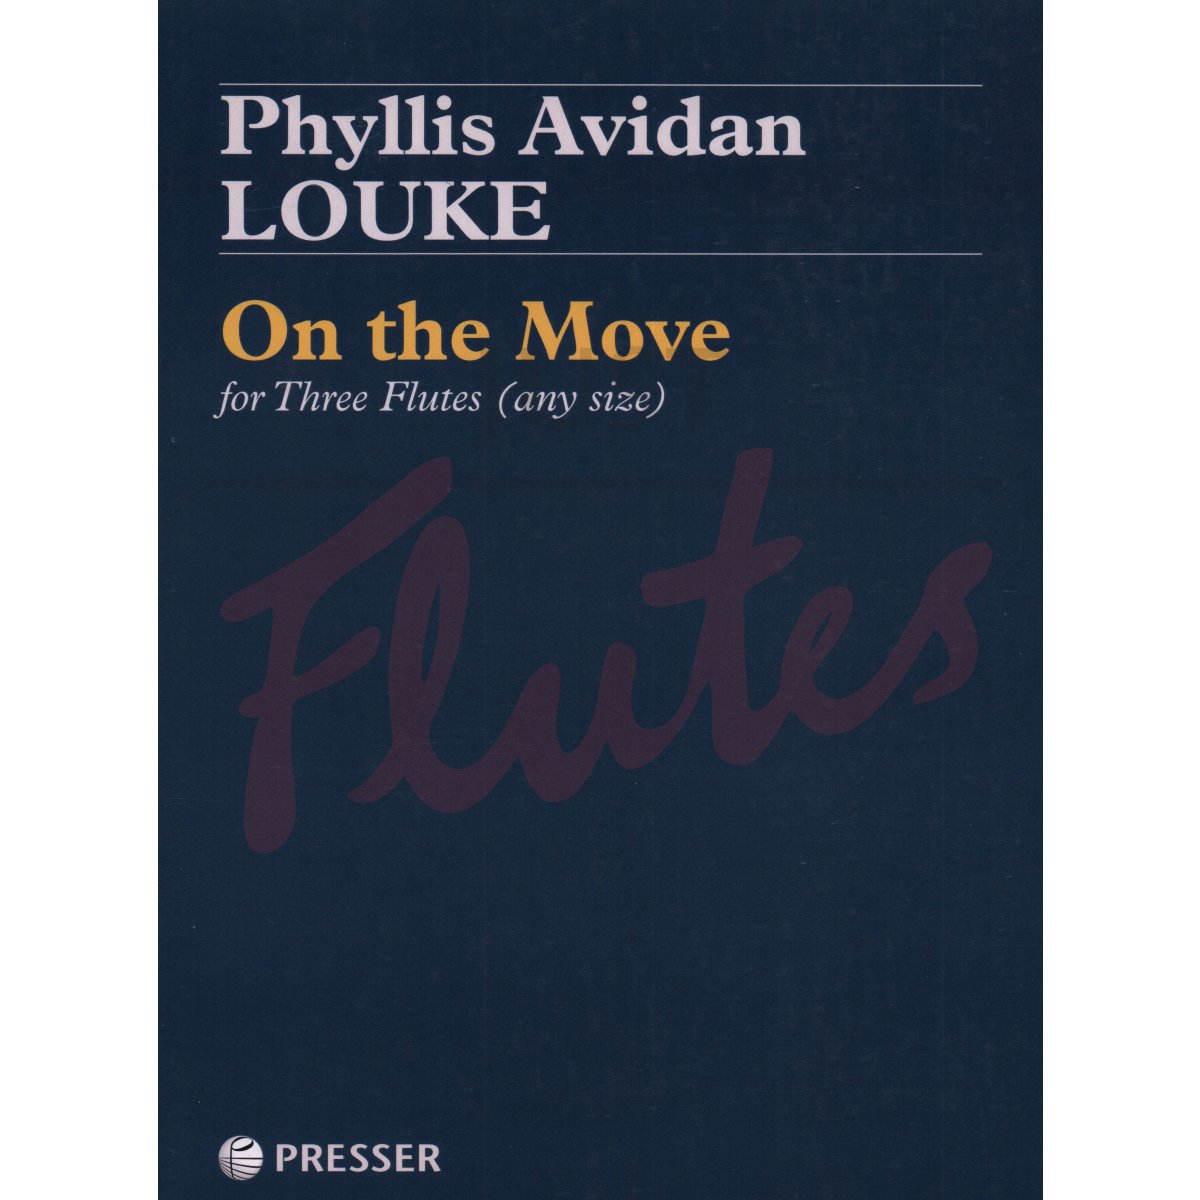 On the Move for Three Flutes